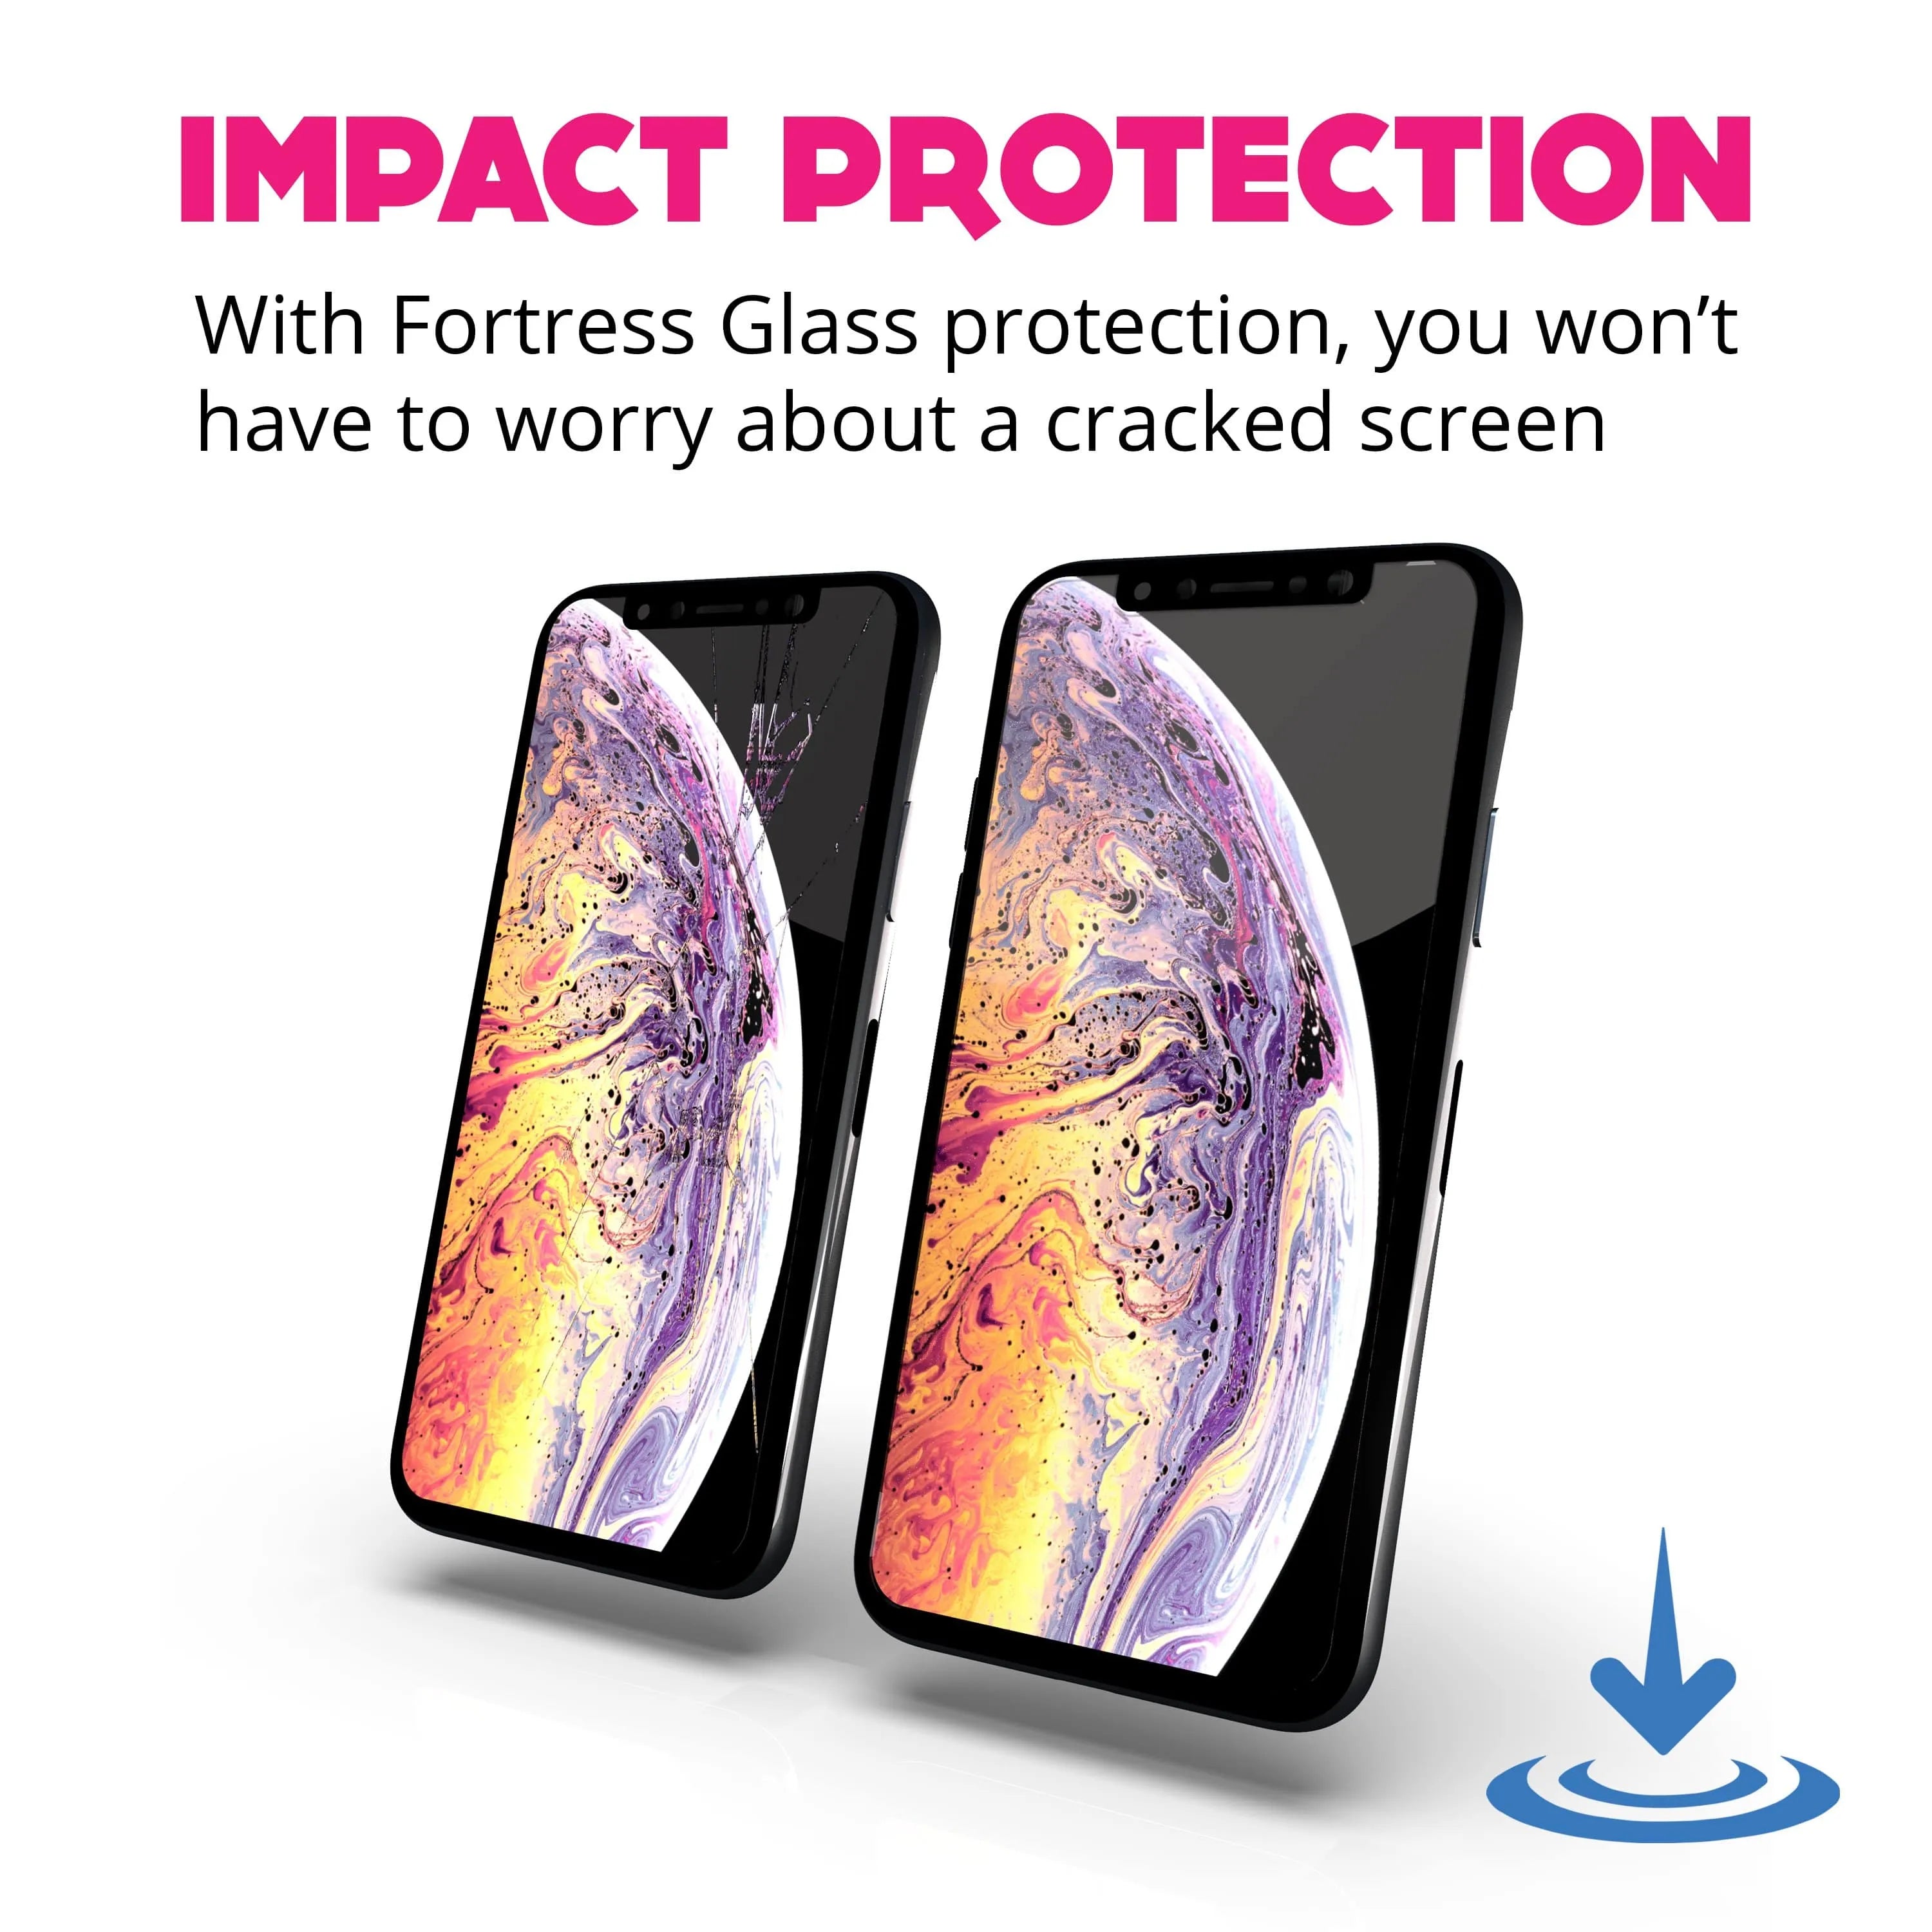 Fortress iPhone 13 Pro Screen Protector - $200 Device Coverage  Scooch Screen Protector